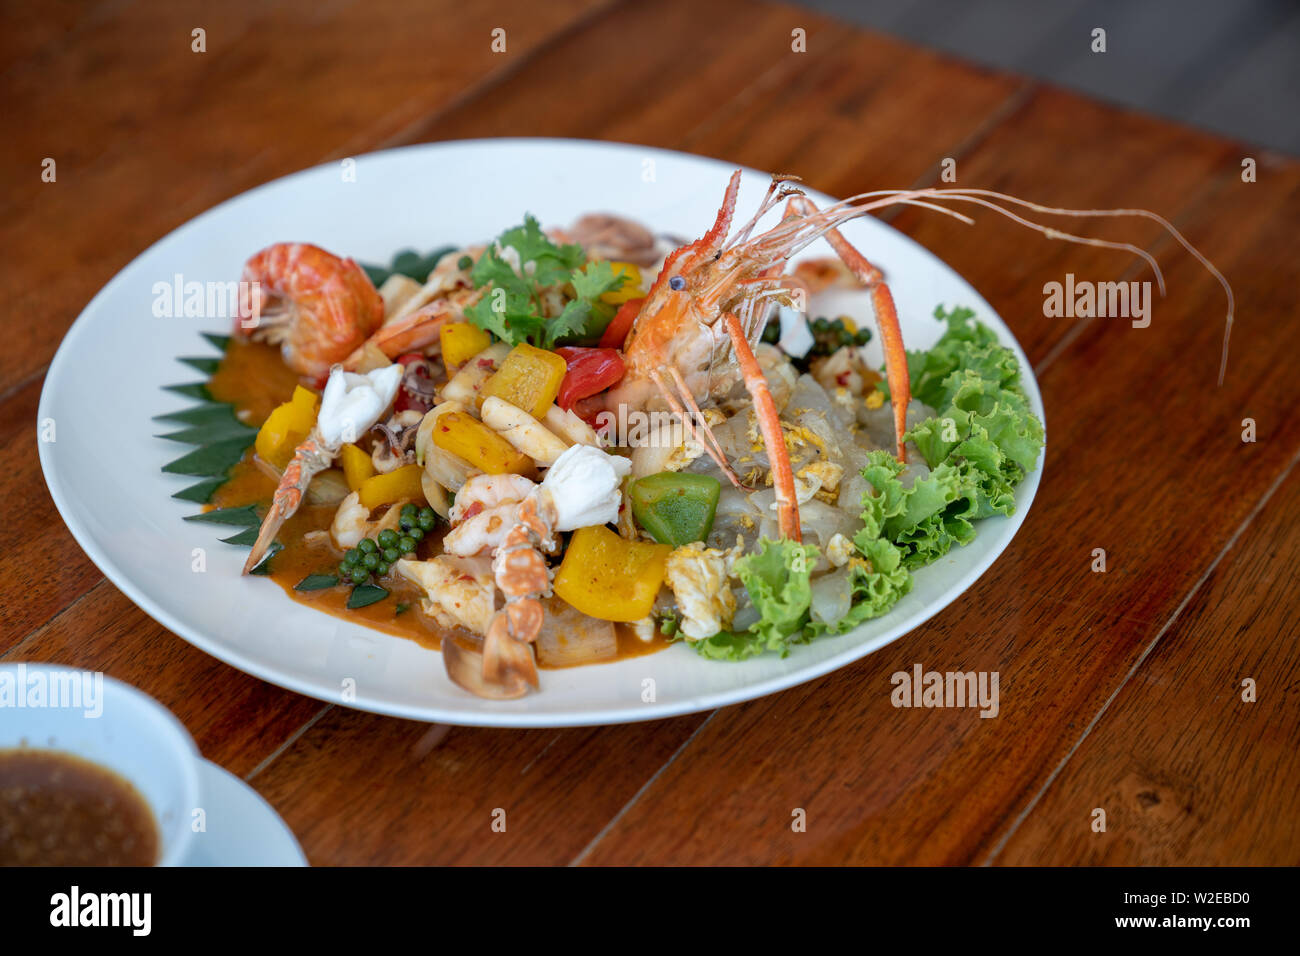 Seafood Thai mixxed together between boiled shrimp, crab, squid and colourful vegetable in dish on wood table in restaurant. Stock Photo